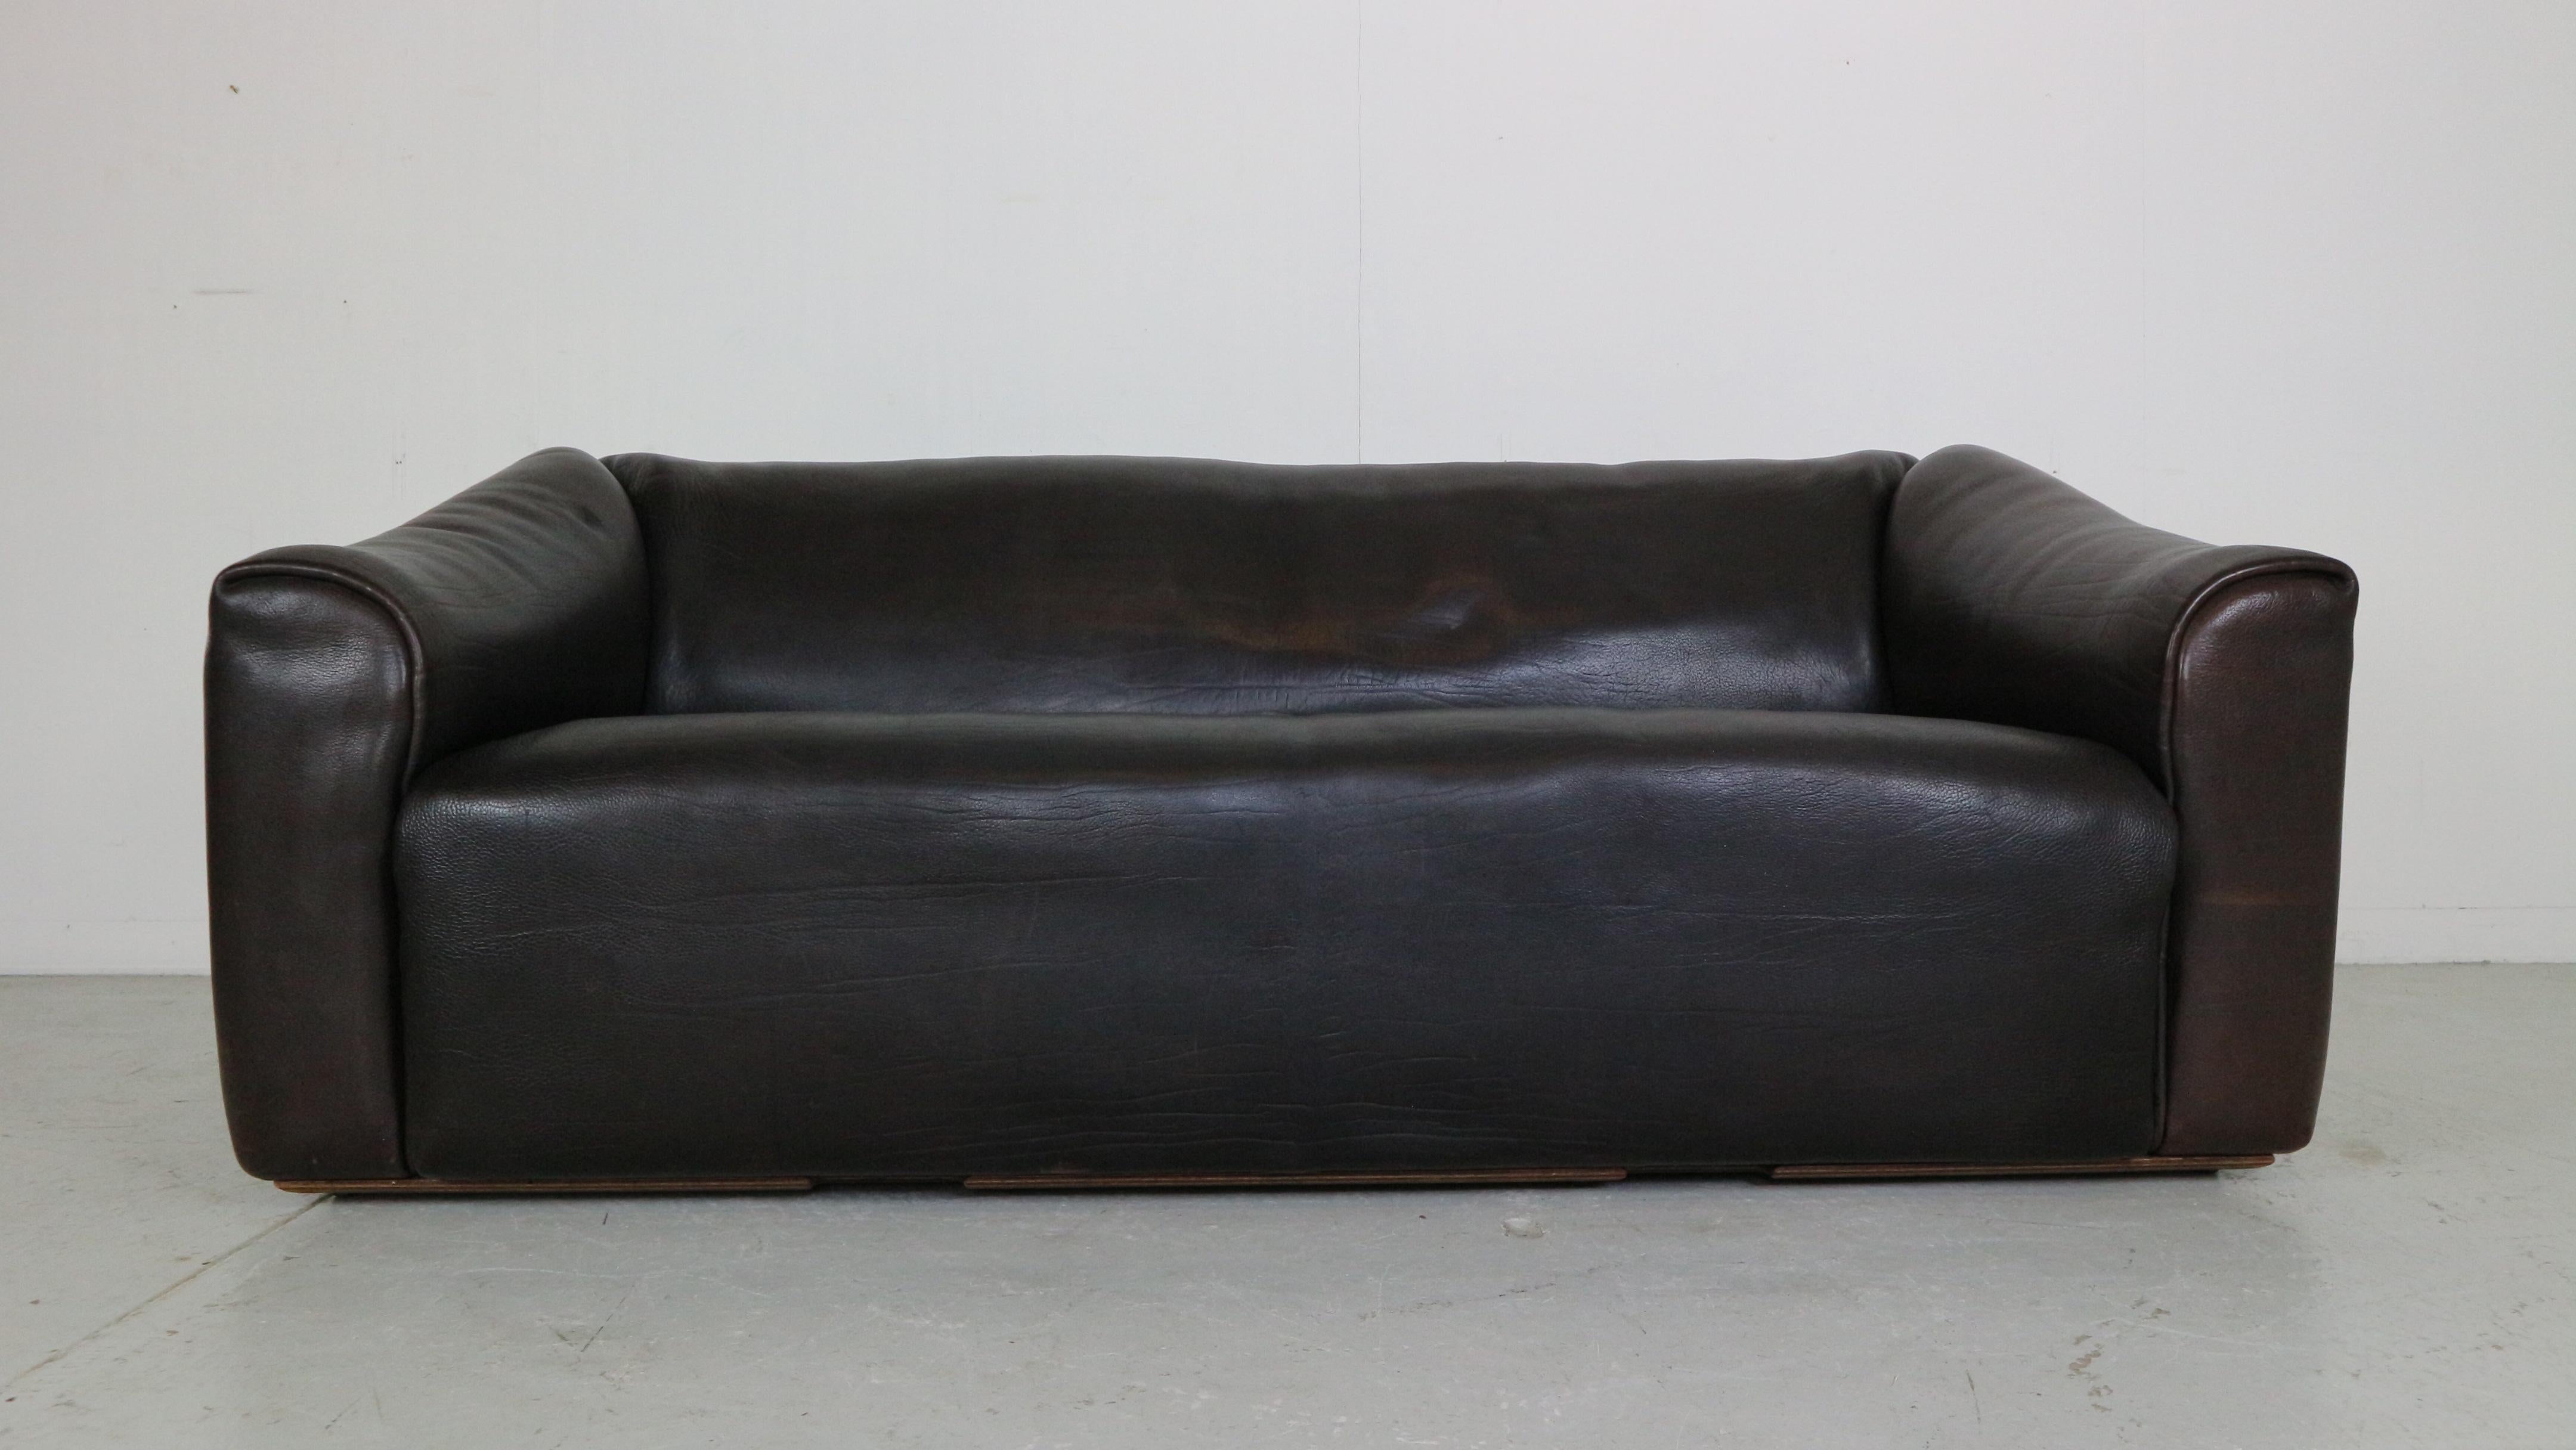 Two-seater extendable dark brown/black heavy Buffalo leather sofa designed and manufactured by De Sede, Switzerland 1970's period.
DS47- model.

These heavy quality sofas are made of very thick buffalo leather of the best quality.  
De Sede is known